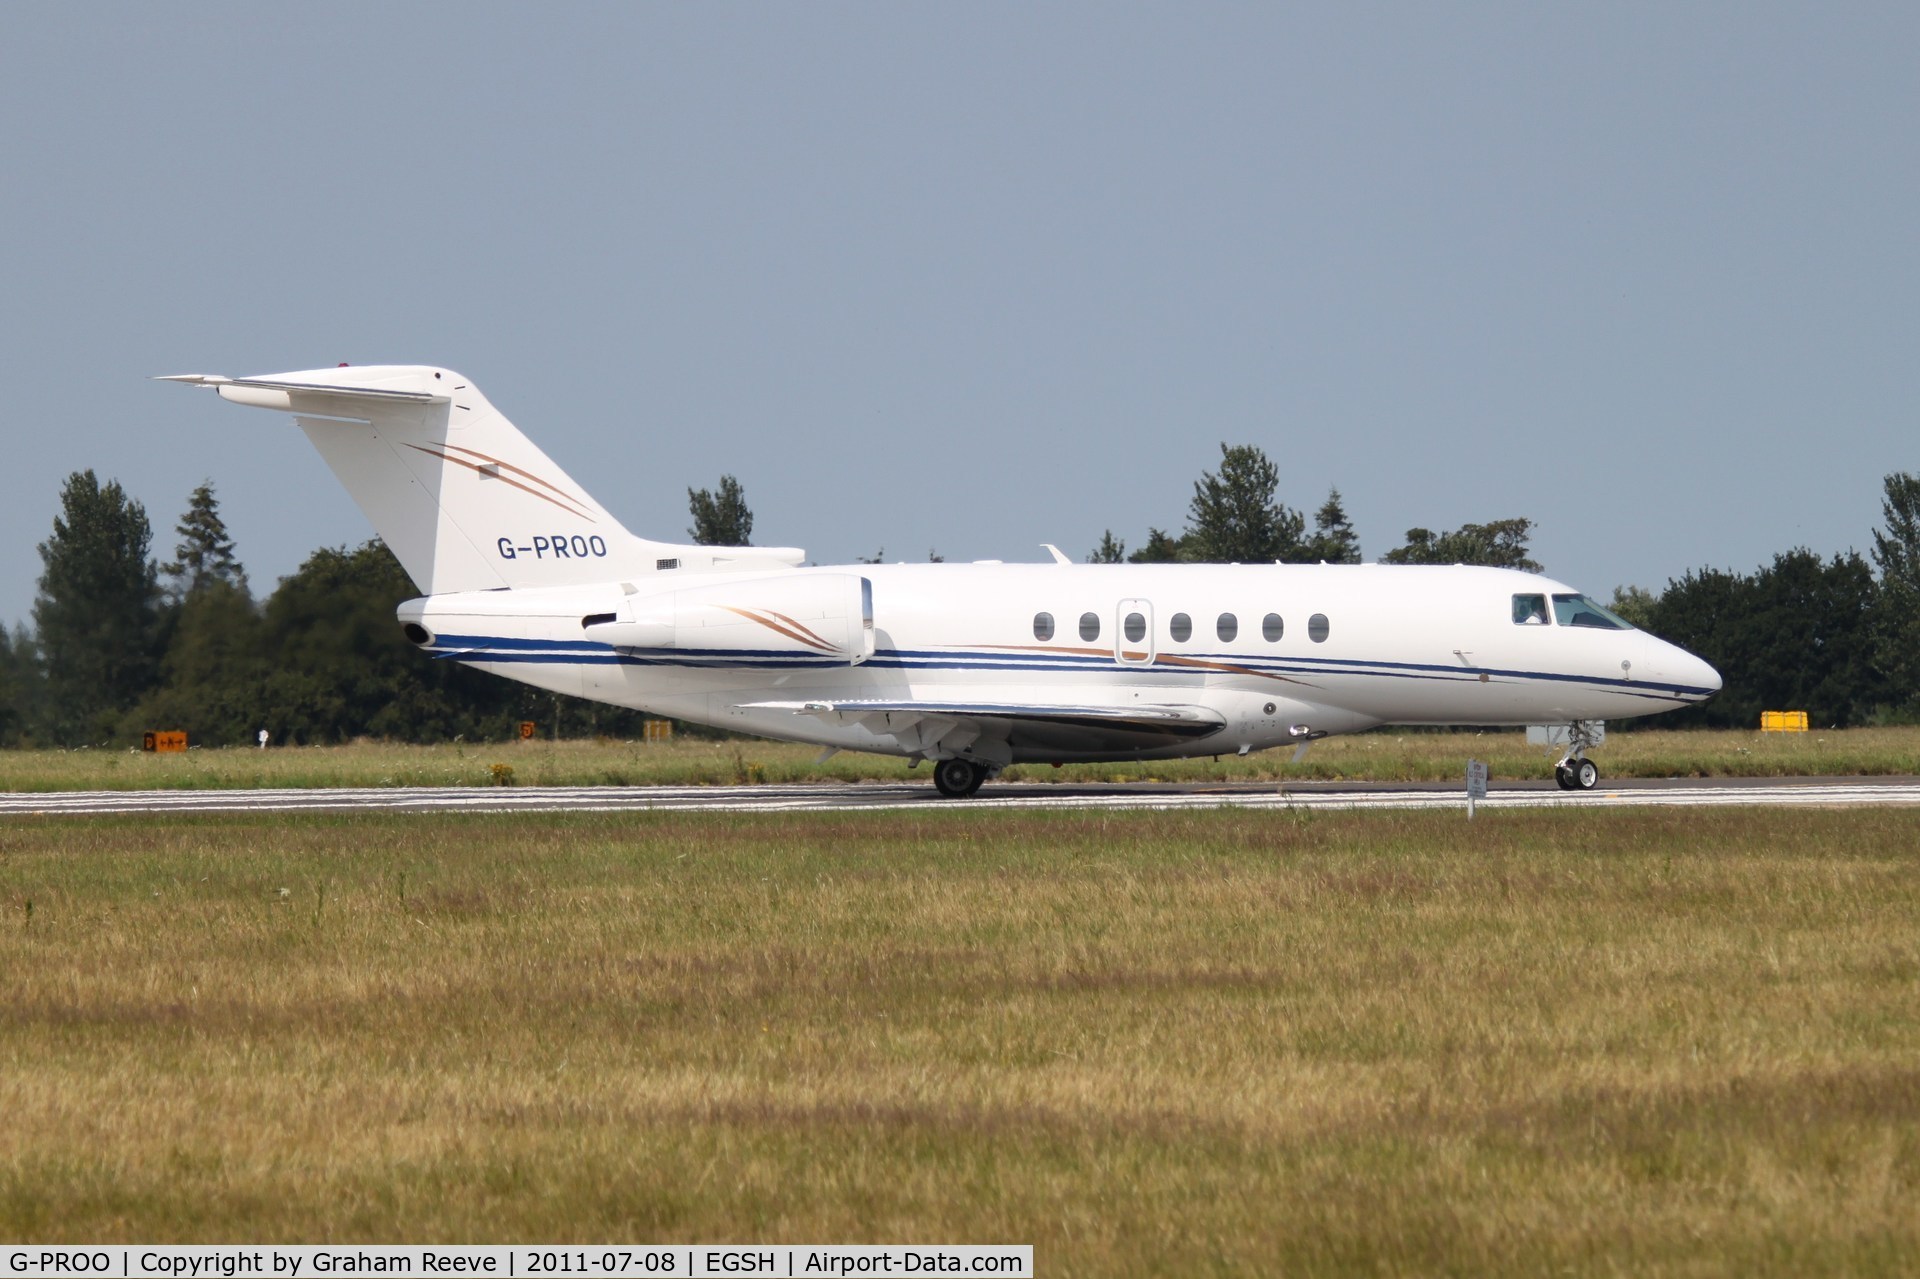 G-PROO, 2009 Hawker Beechcraft 4000 C/N RC-34, About to depart.